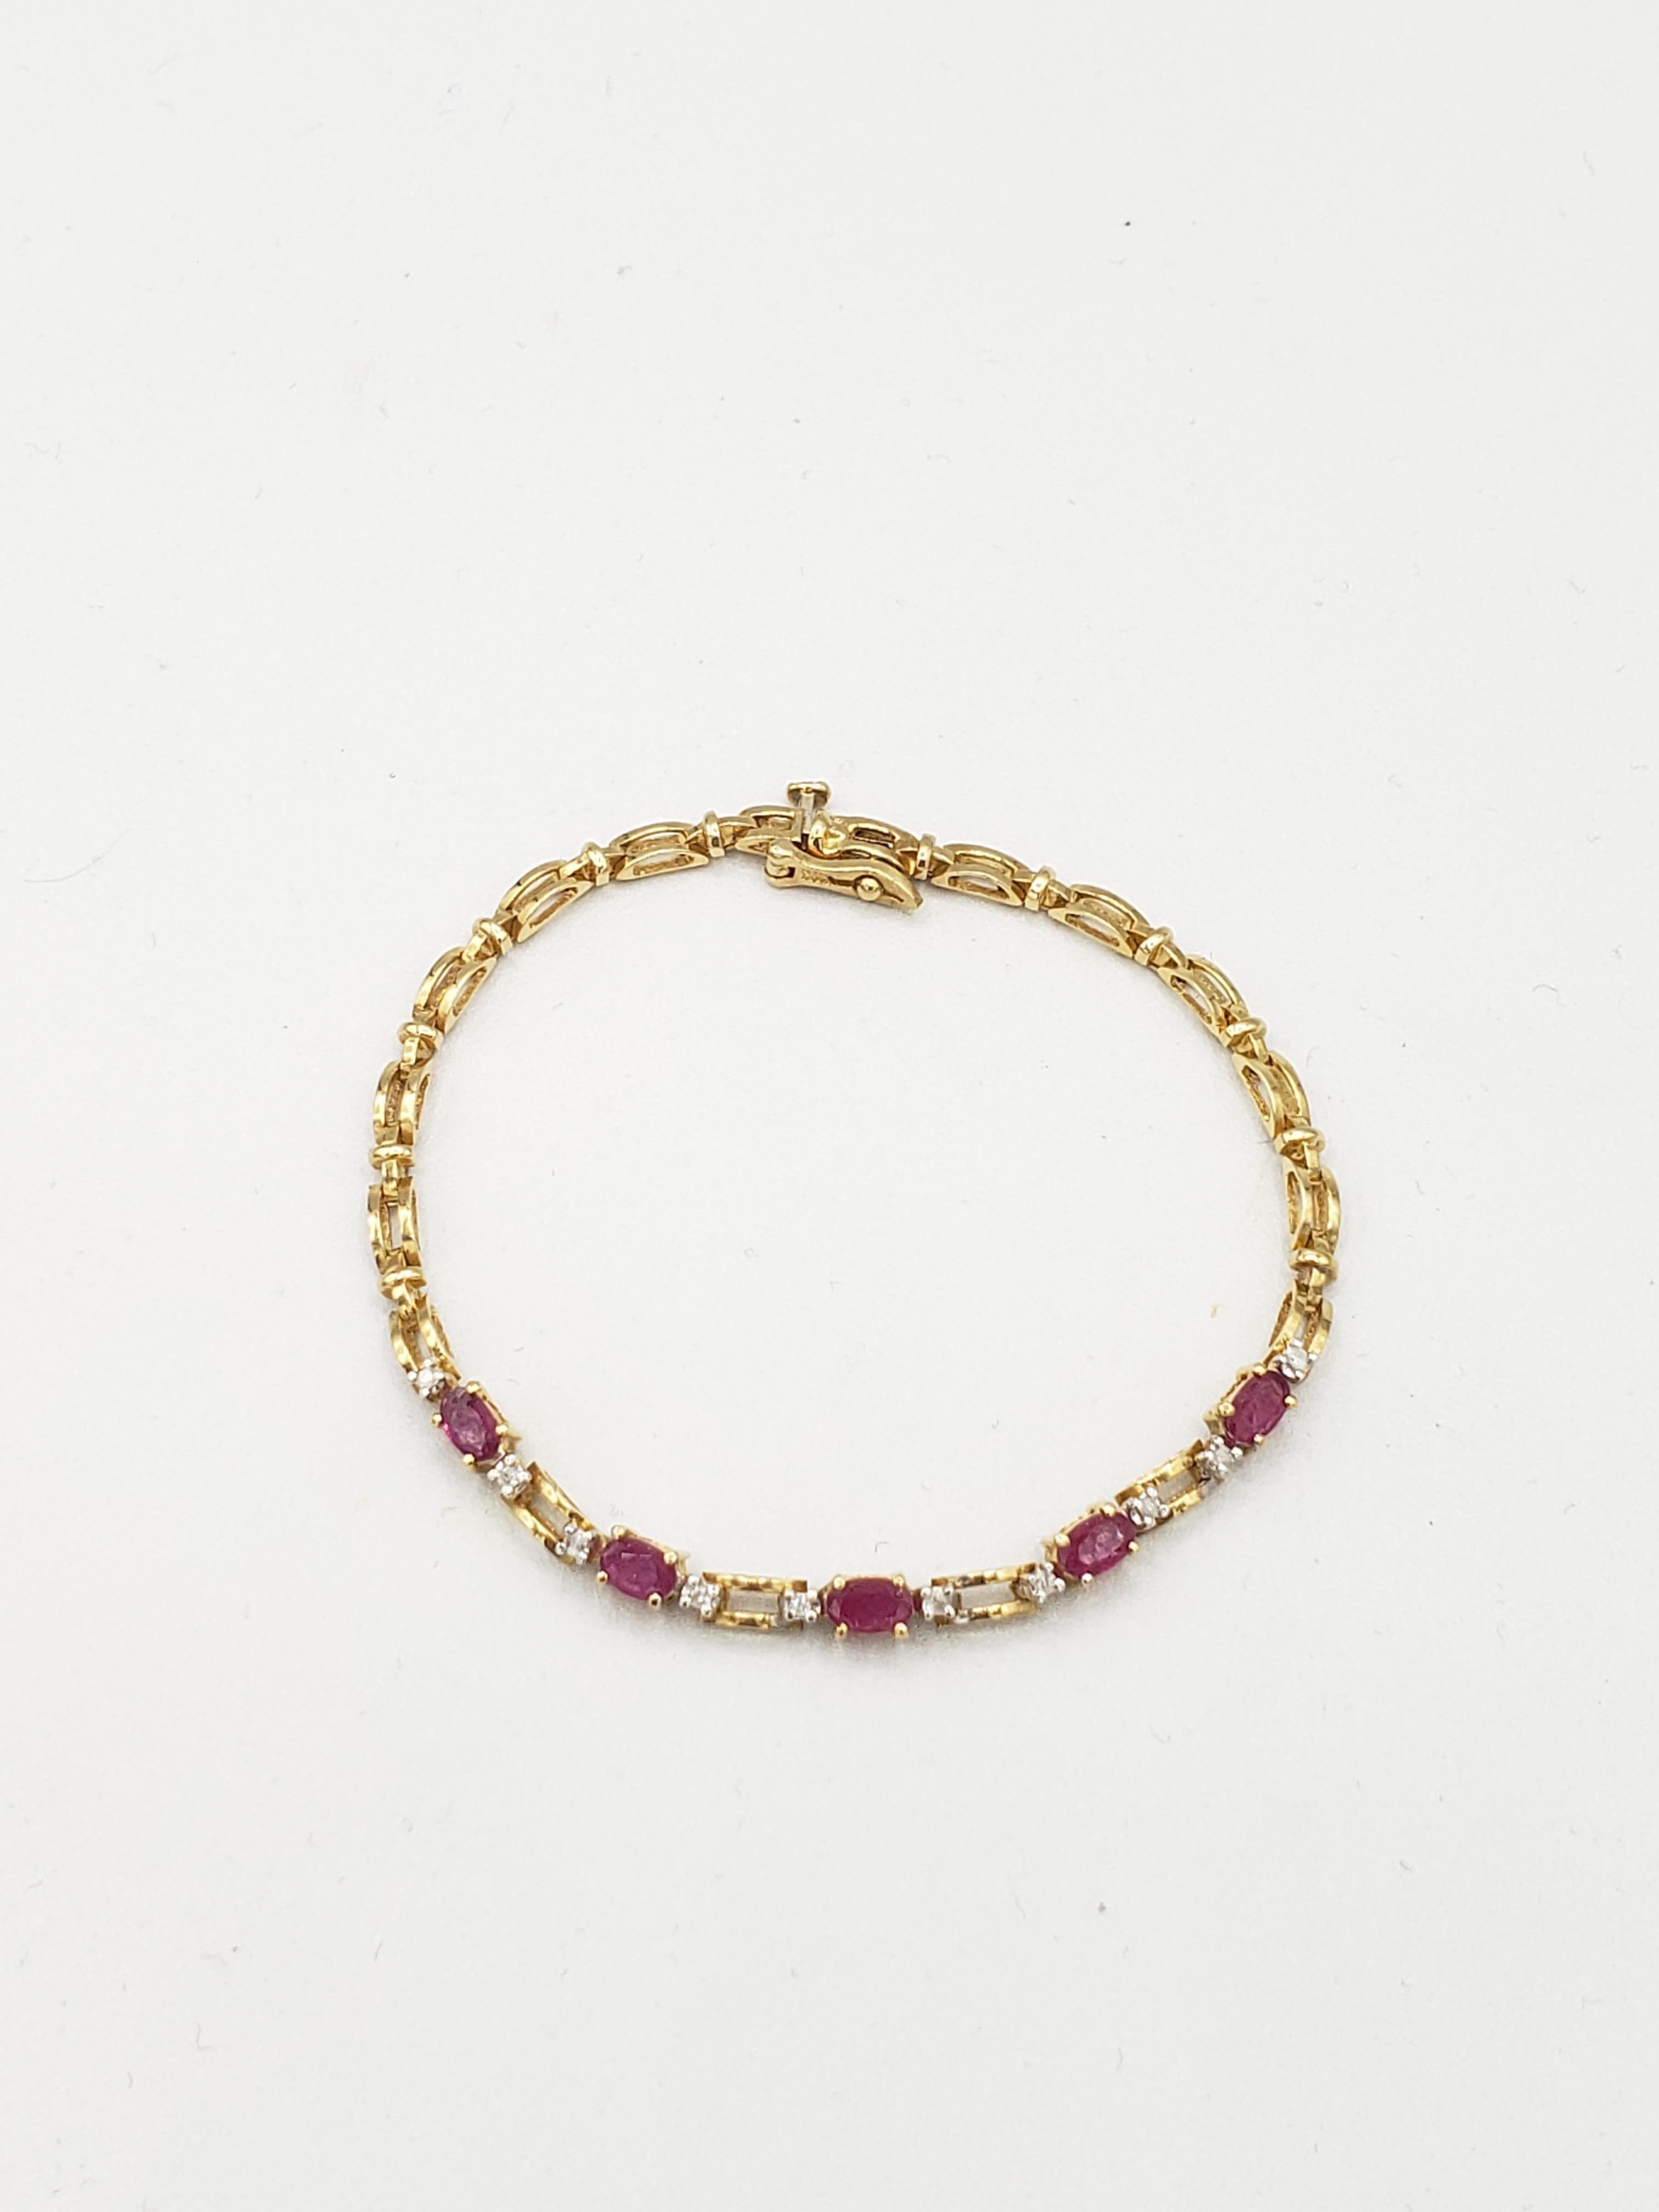 NEW Natural Precious Ruby and Diamond Tennis Bracelet 14k Gold For Sale 1